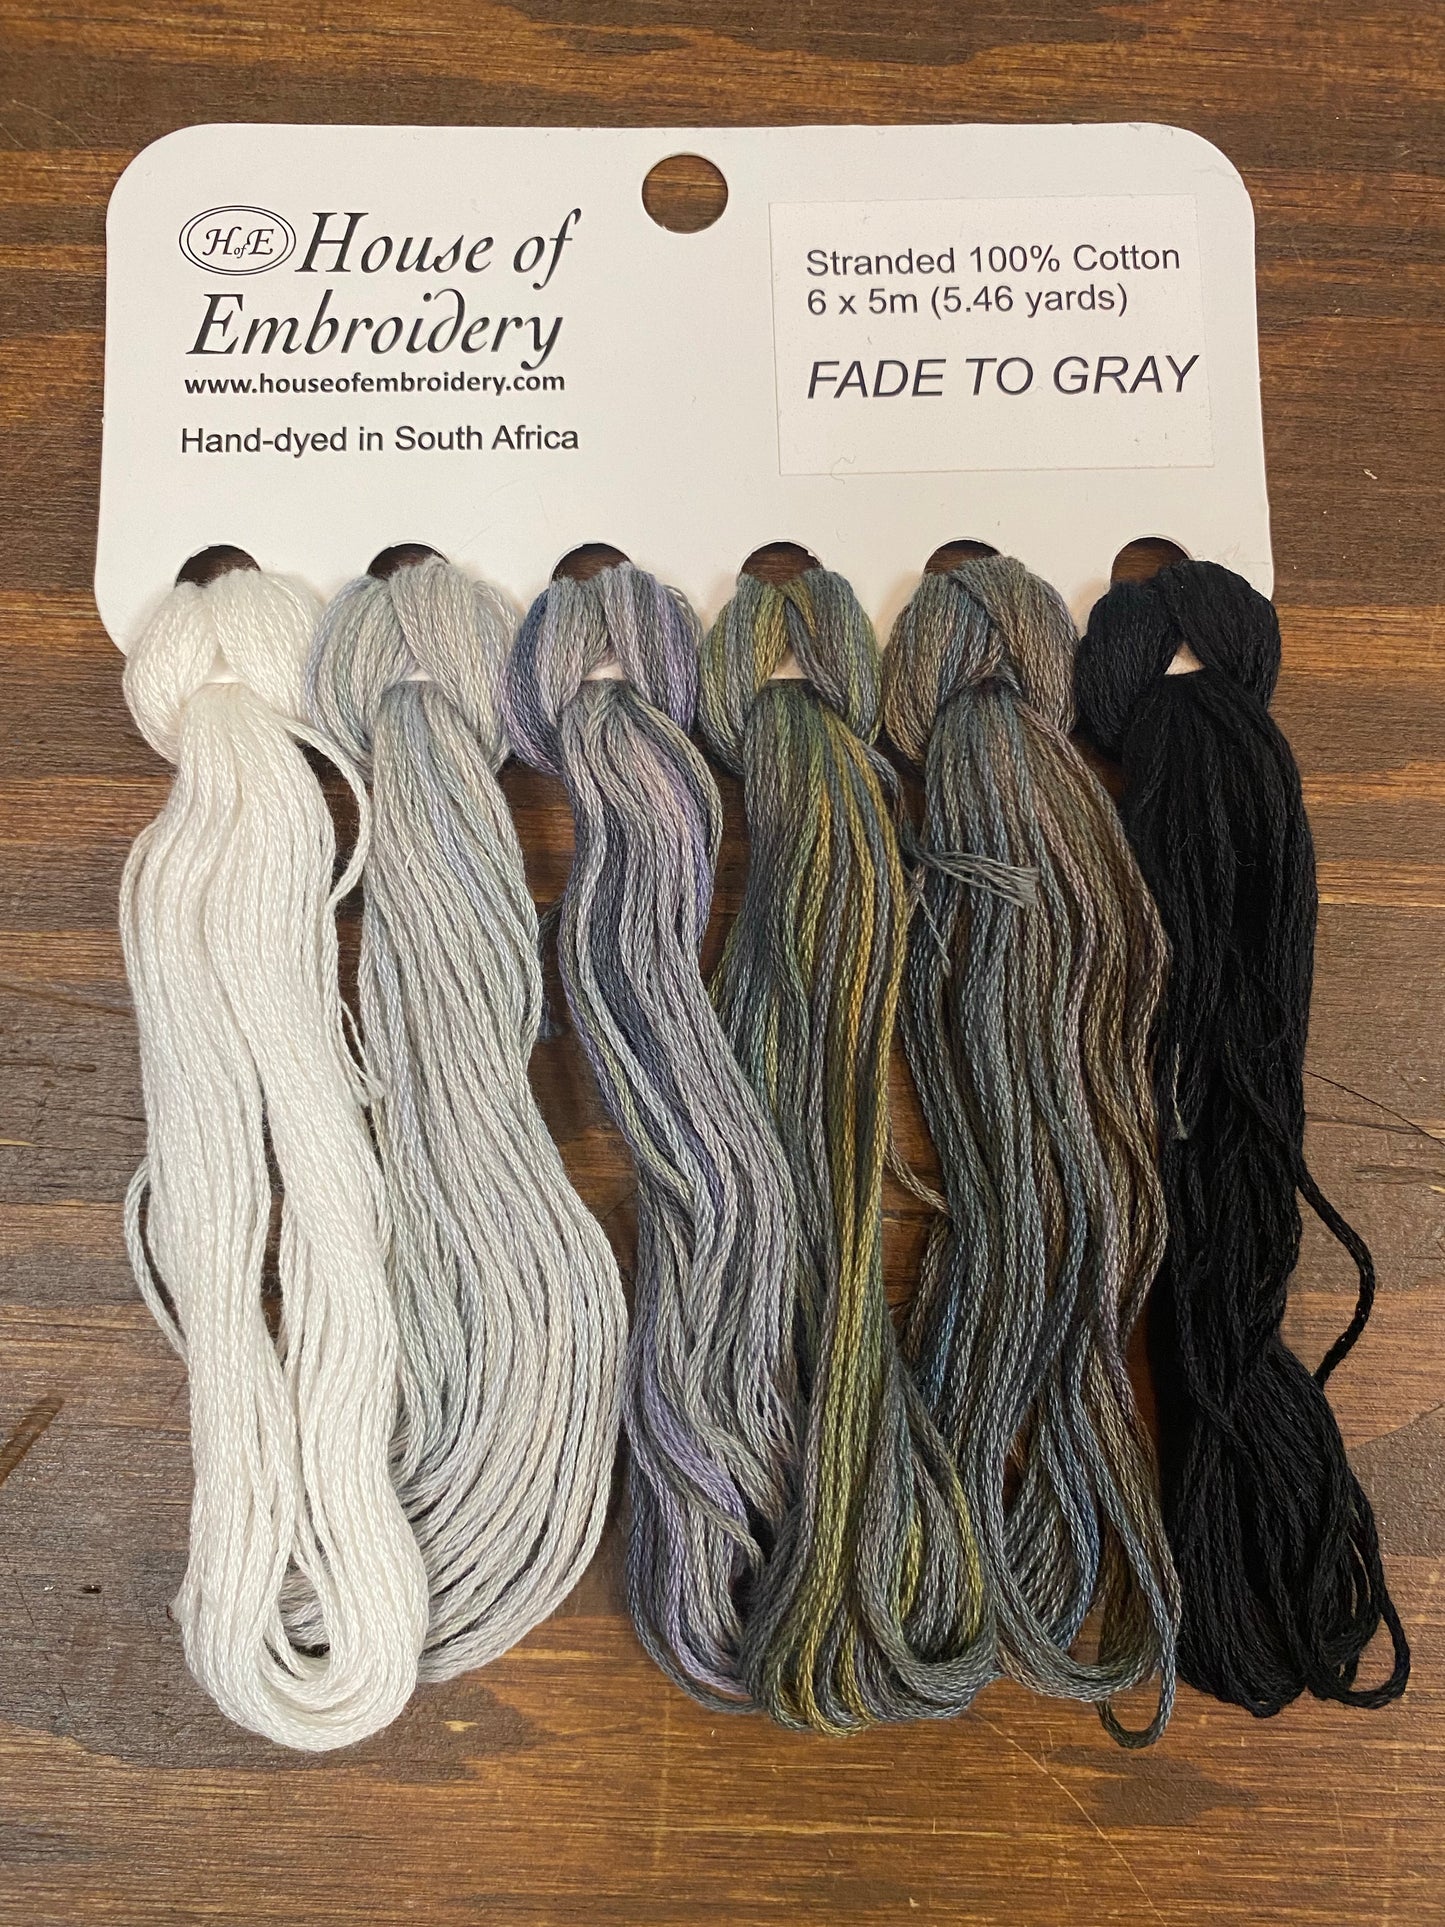 FADE TO GRAY, 6x5m Variety Pack, Cotton Floss